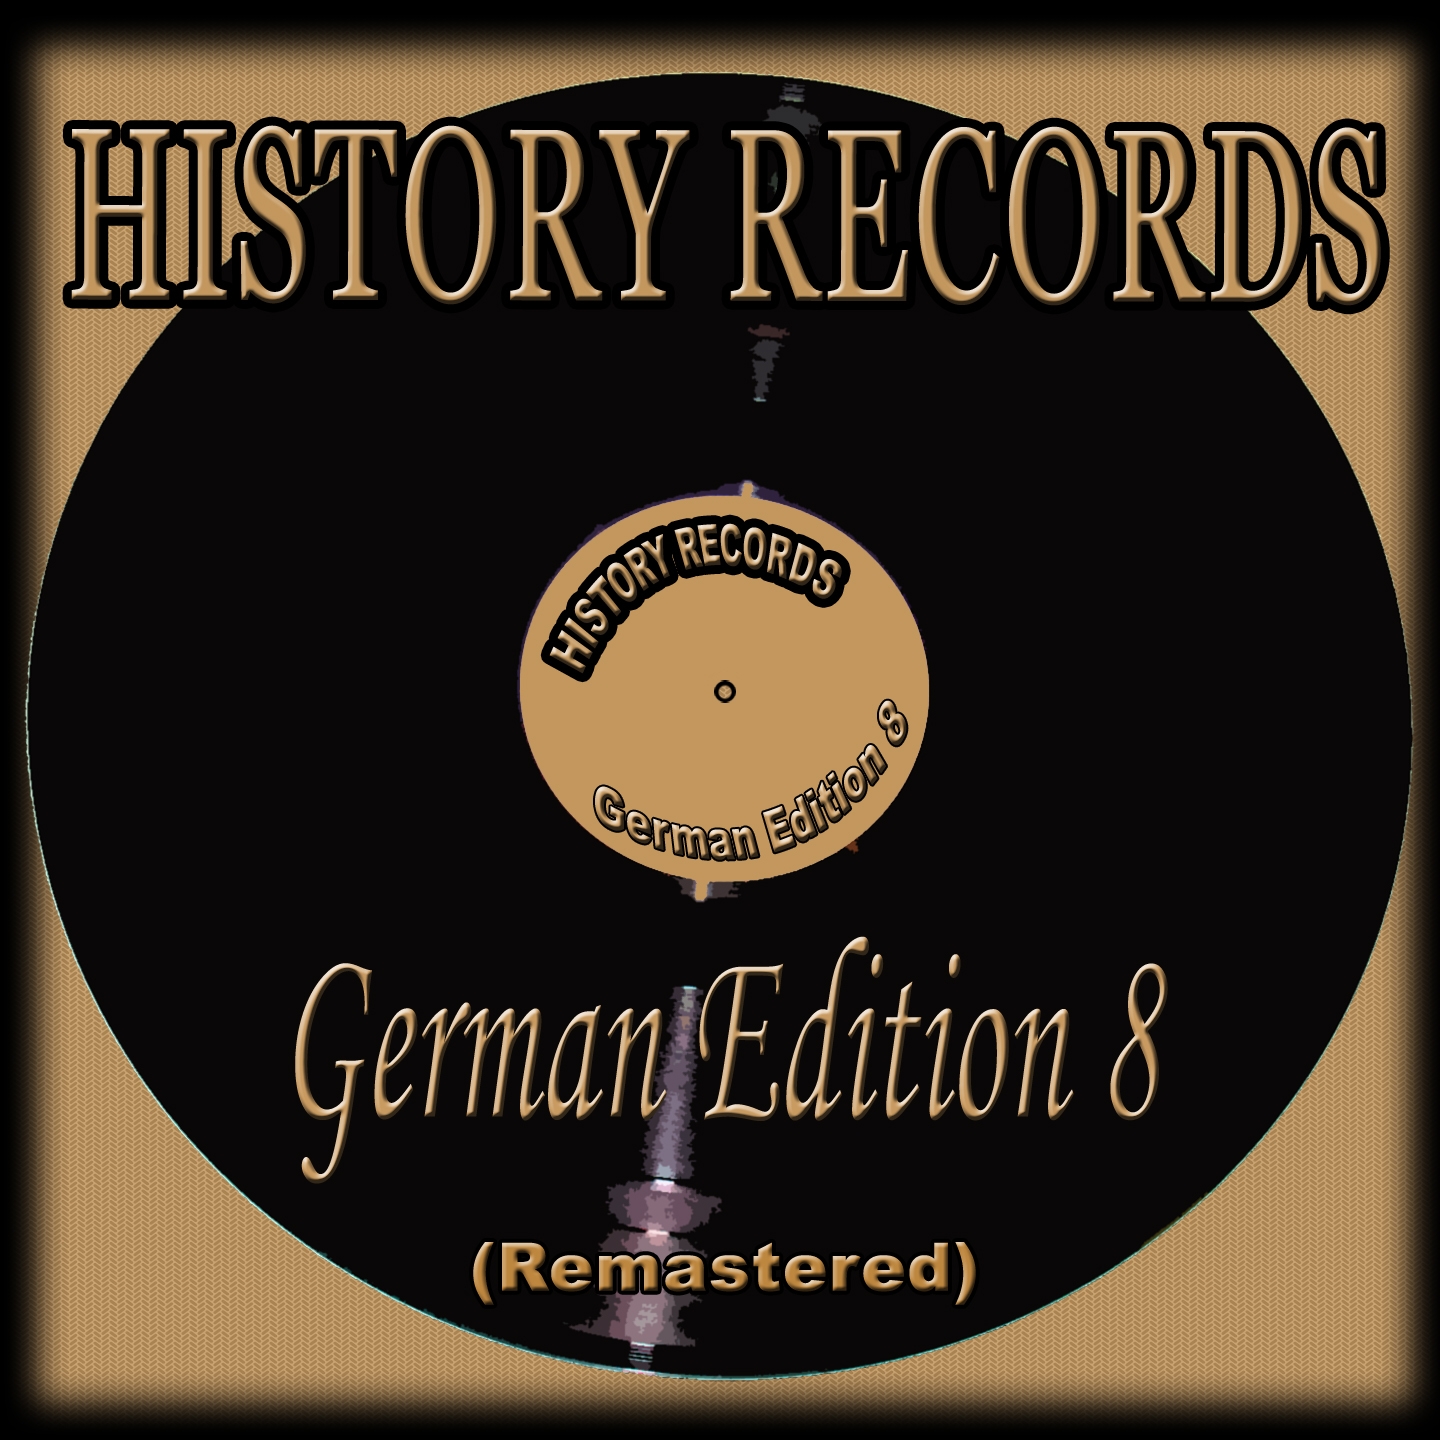 History Records - German Edition 8 (Remastered)